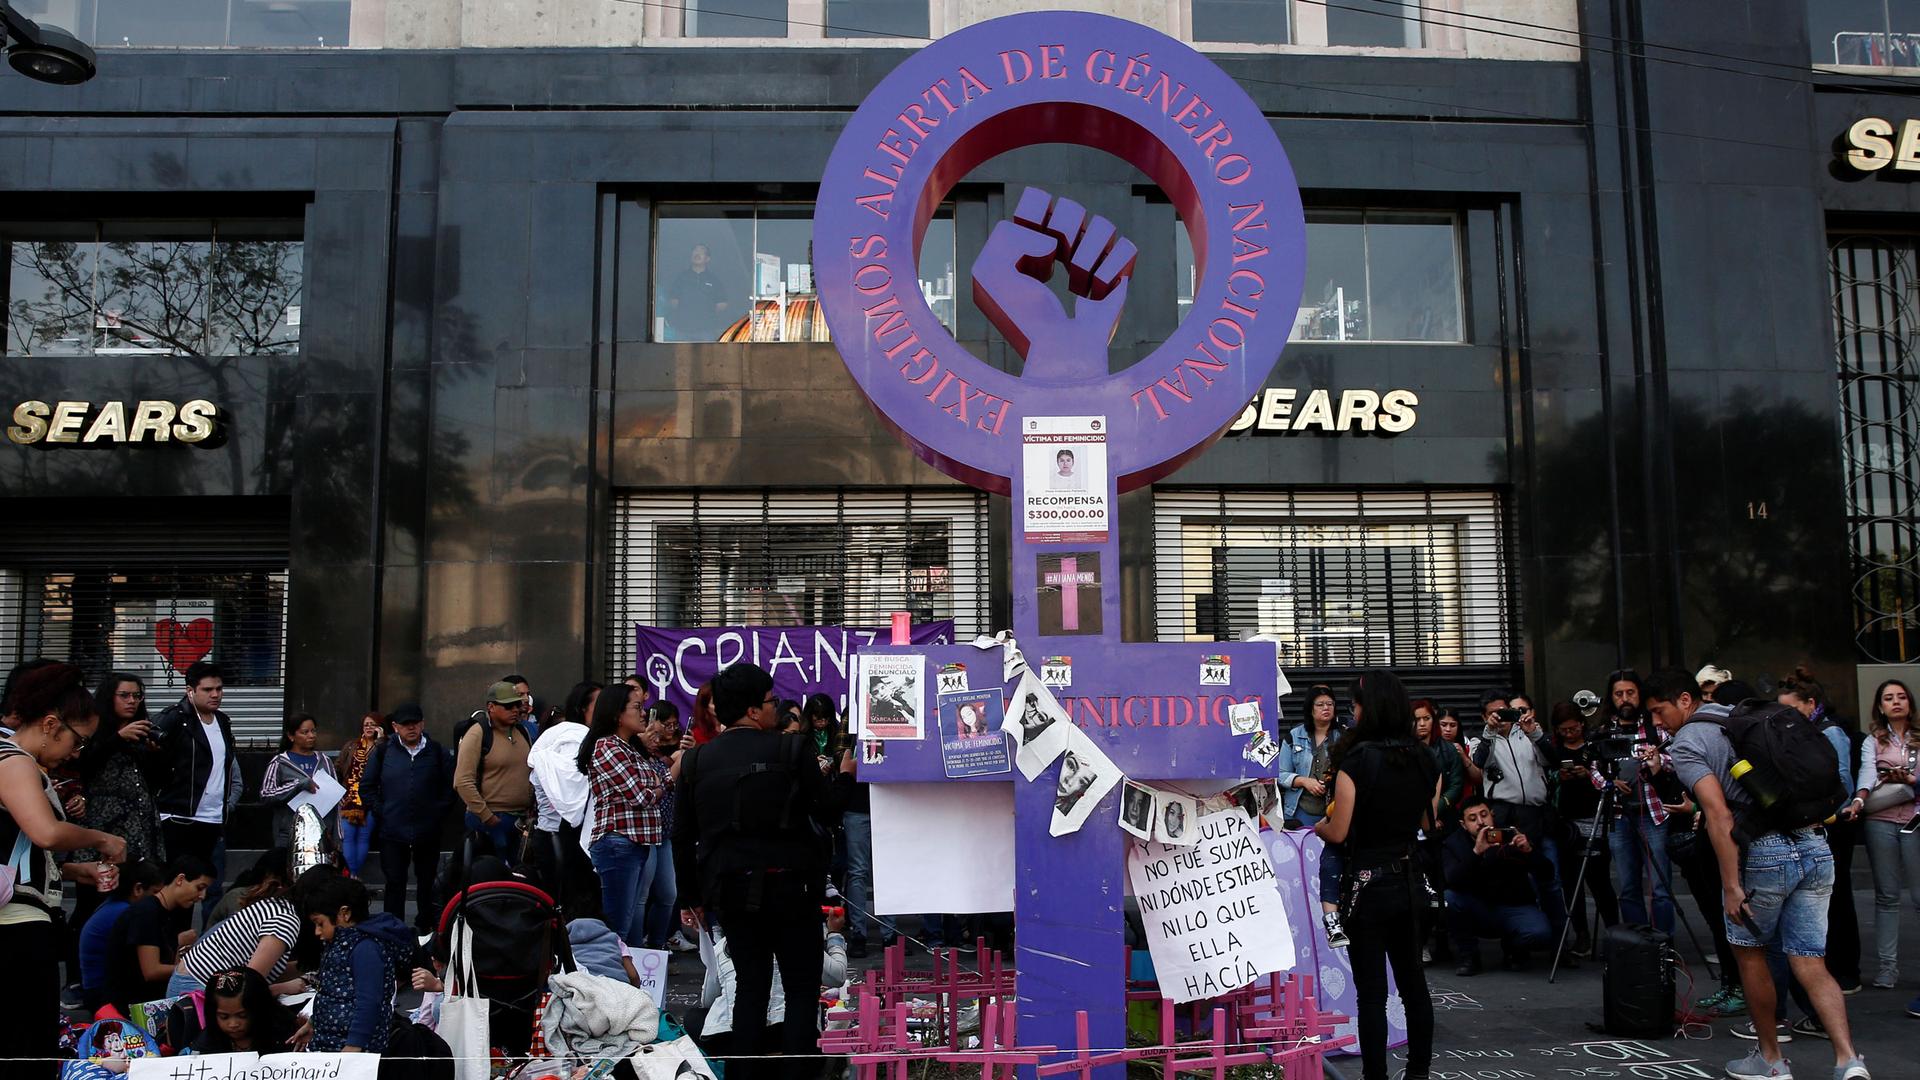 People gather in a memory of seven-year-old Fatima Cecilia Aldrighett, who went missing and whose body was discovered inside a plastic bag, at an anti-femicide monument, in Mexico City, Mexico, Feb. 19, 2020. 